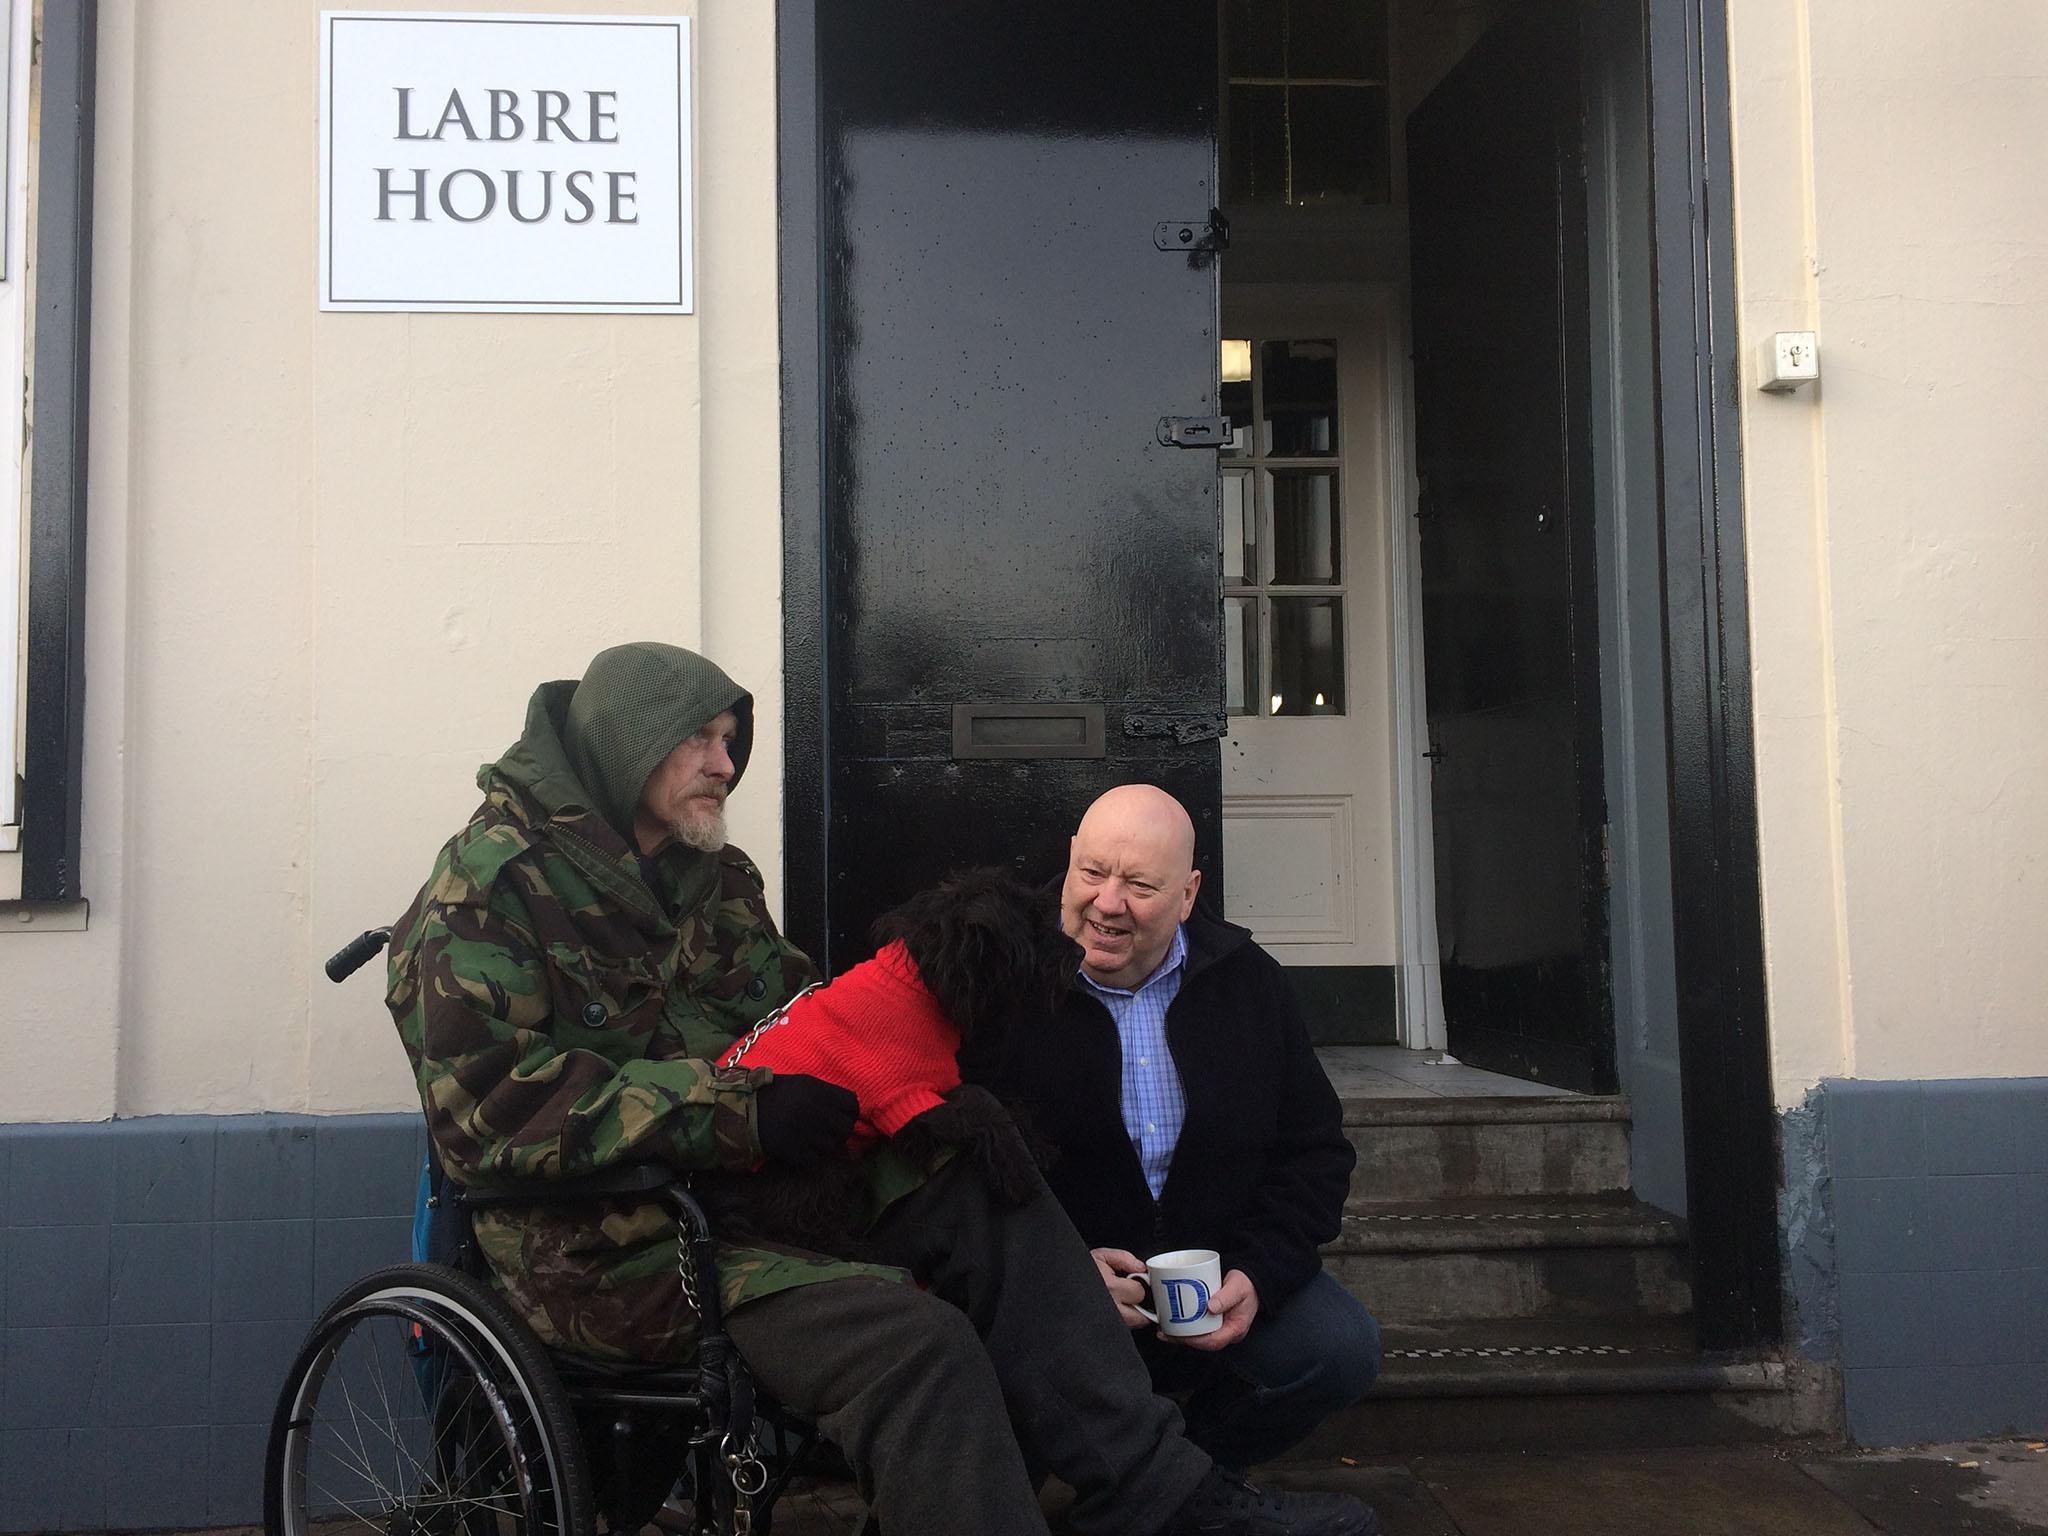 Liverpool Mayor Joe Anderson (right) sits with one of the new residents at the Labre House homeless shelter in the city centre